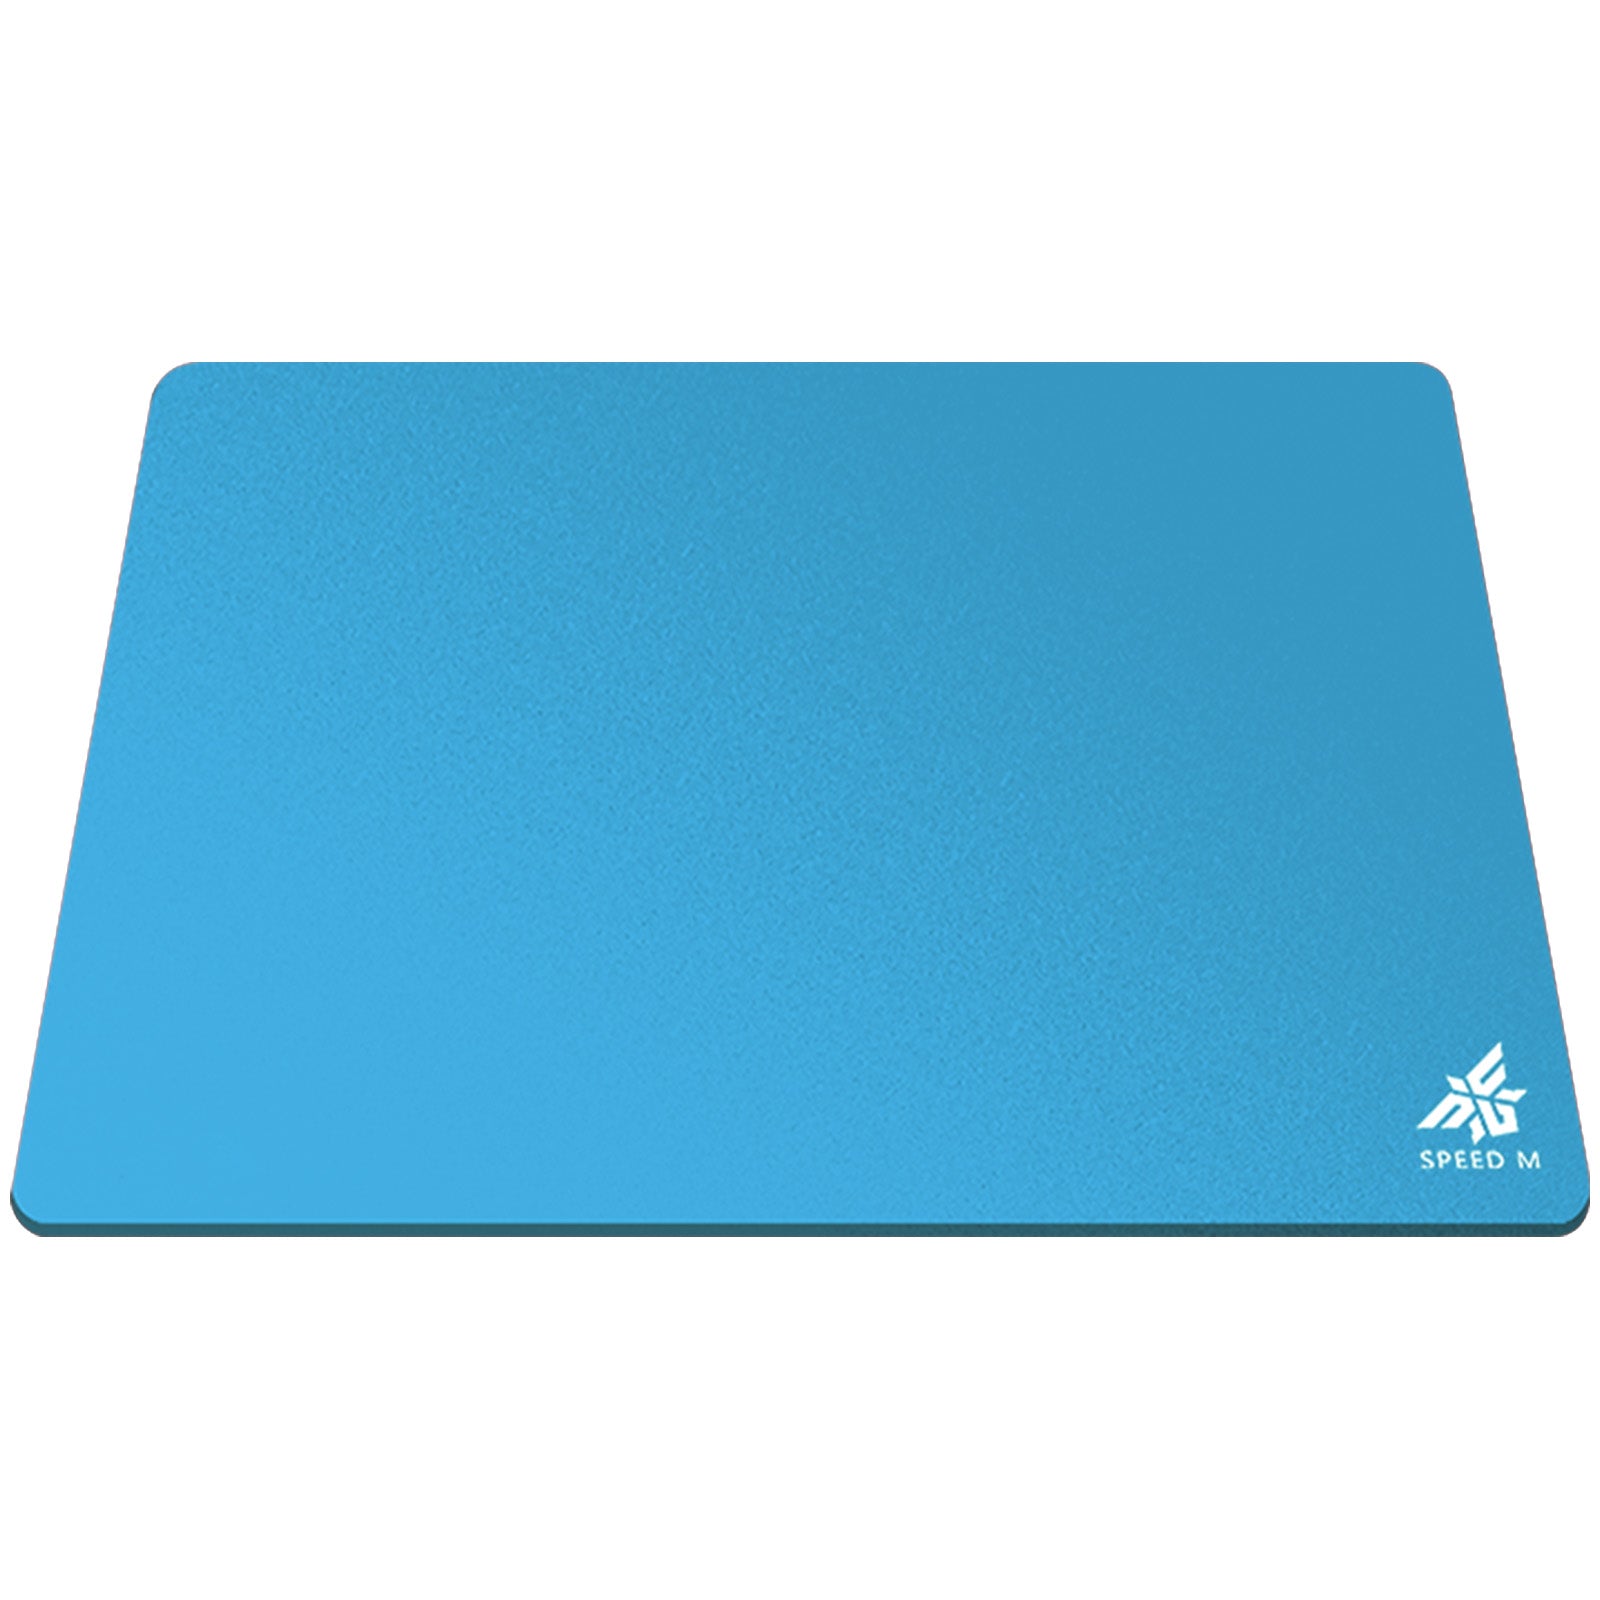 NPET SPEEDM Gaming Mousepad - Resin Surface Hard Gaming Mouse pad,Balanced Control & Speed, No Smell Waterproof Mouse Mat for Esports Gamers [Hard/Fast] Blue, Large